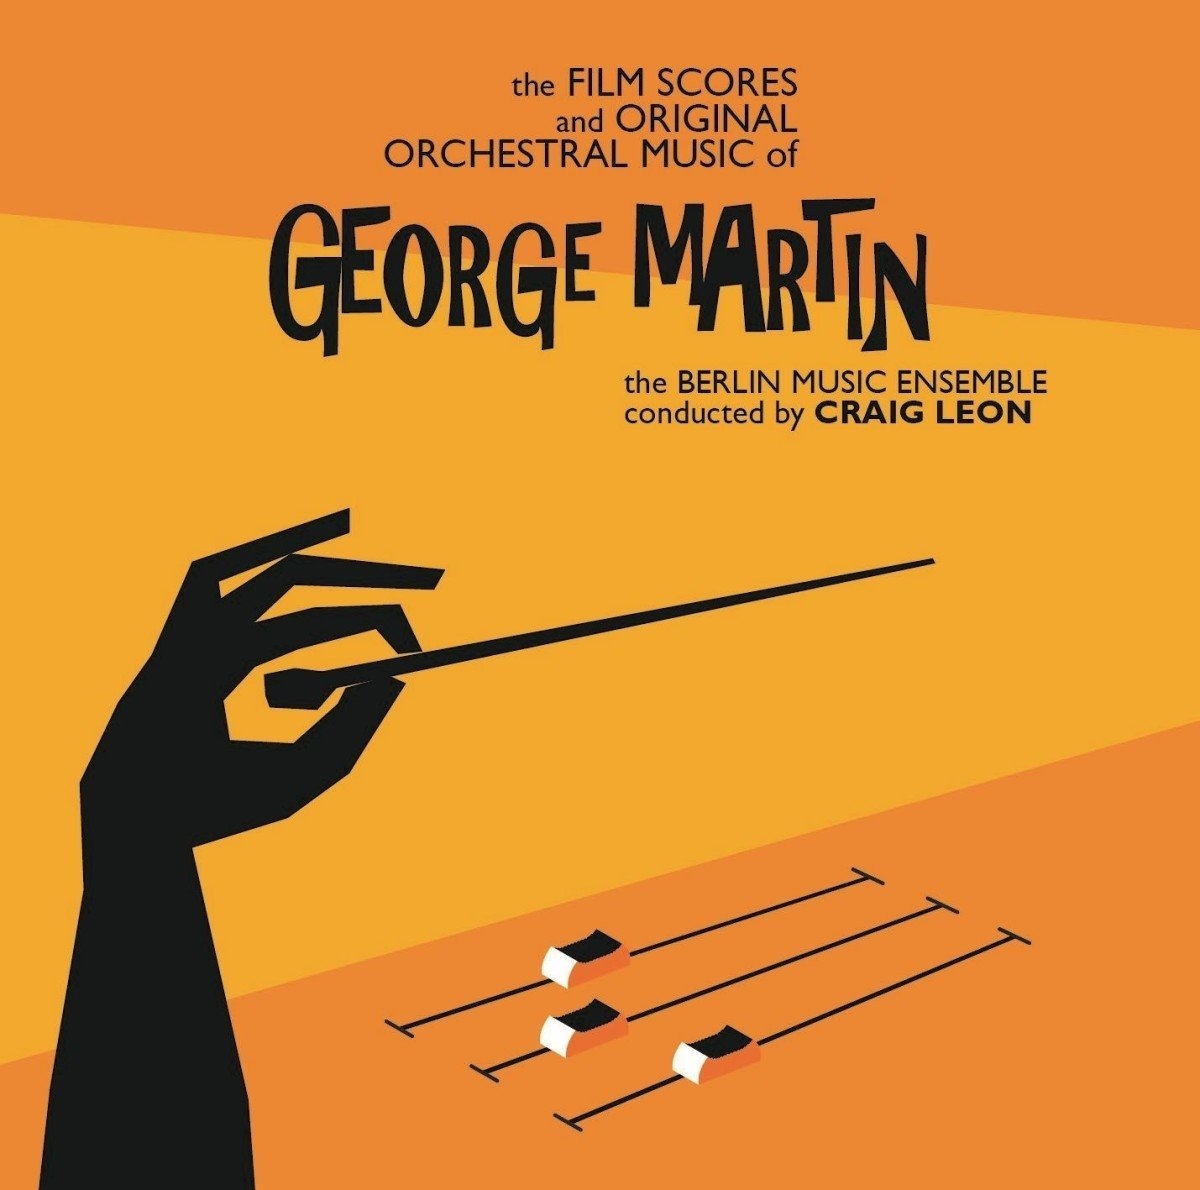 ost 12 17 George Martin The Film Scores and Original Orchestral Music Front Cover copy